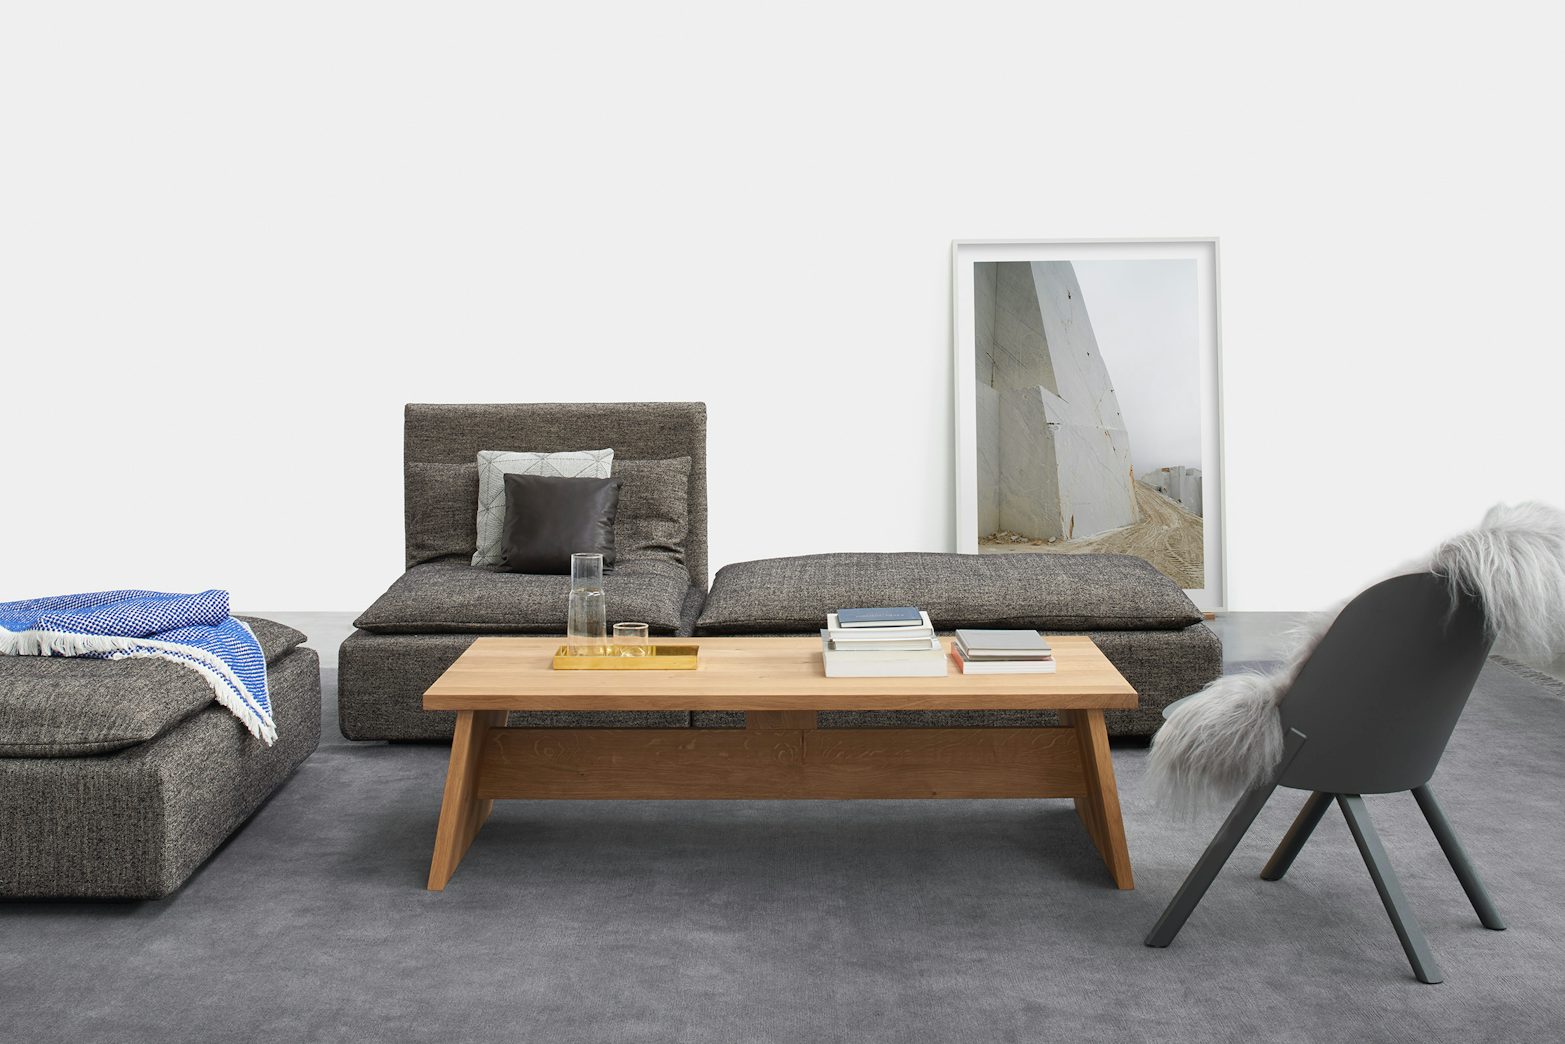 e15 that lounge chair with iceland sheepskin and leighton table